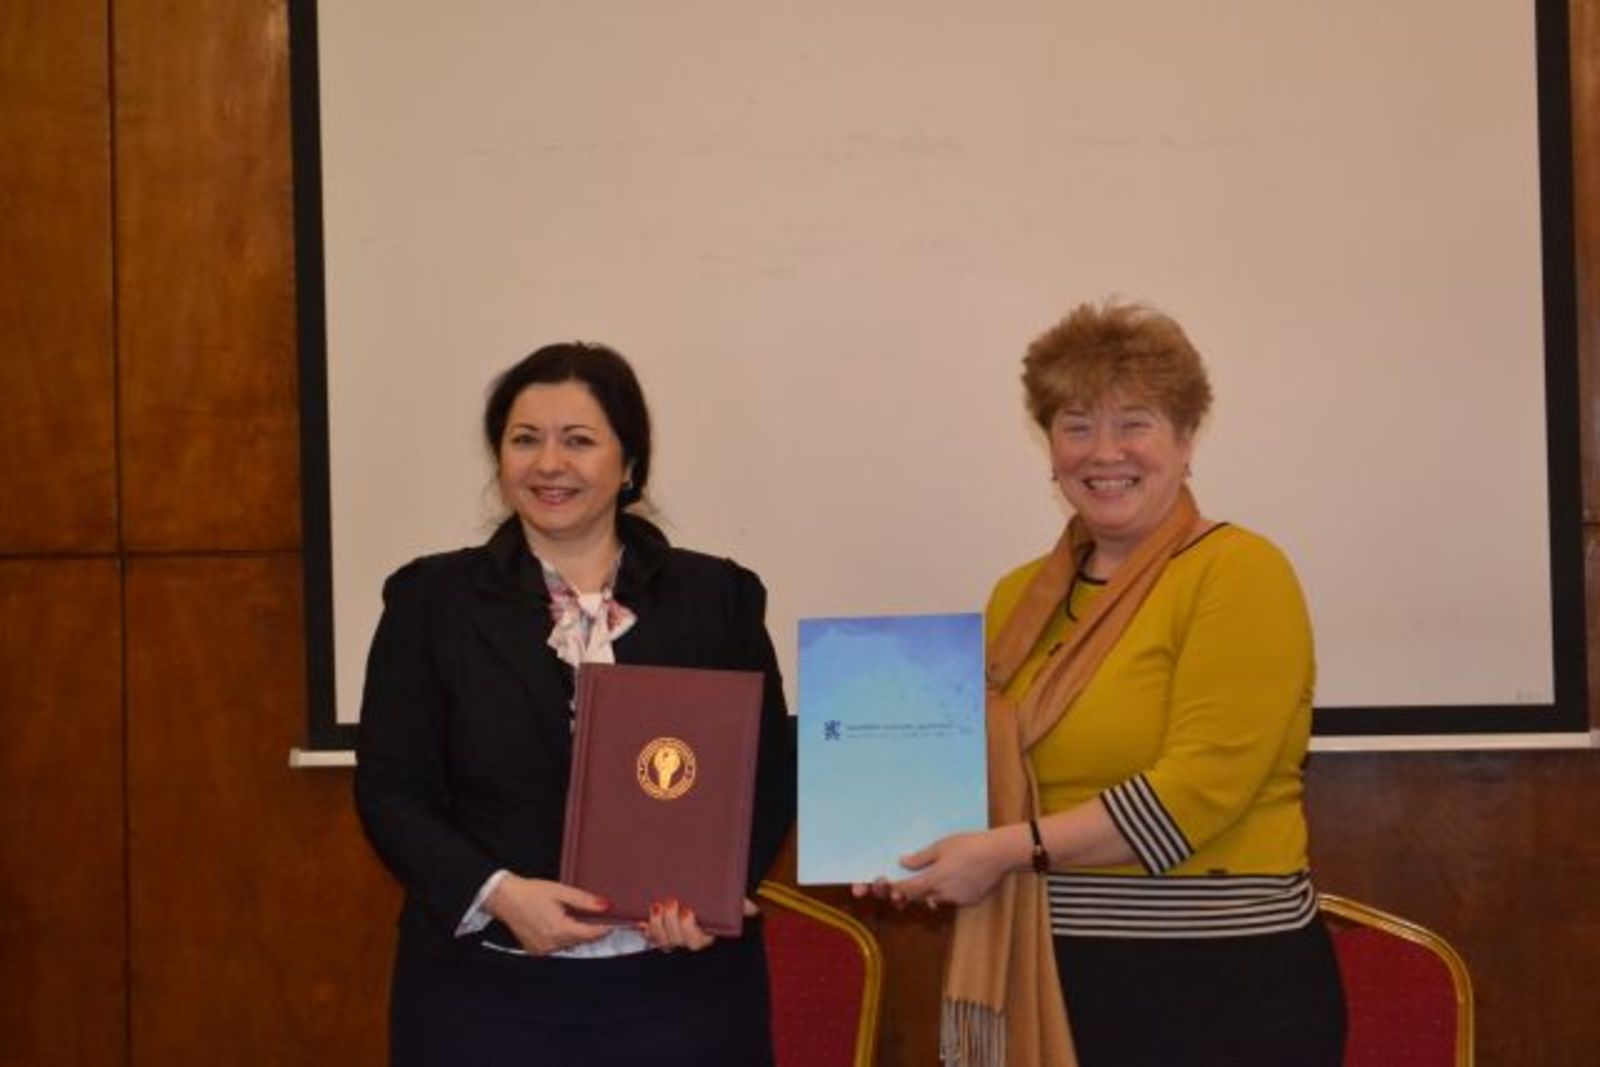 THE STATE INSTITUTE FOR CULTURE AND THE FACULTY OF CLASSICAL AND NEW PHILOLOGIES SIGNED A COOPERATION AGREEMENT